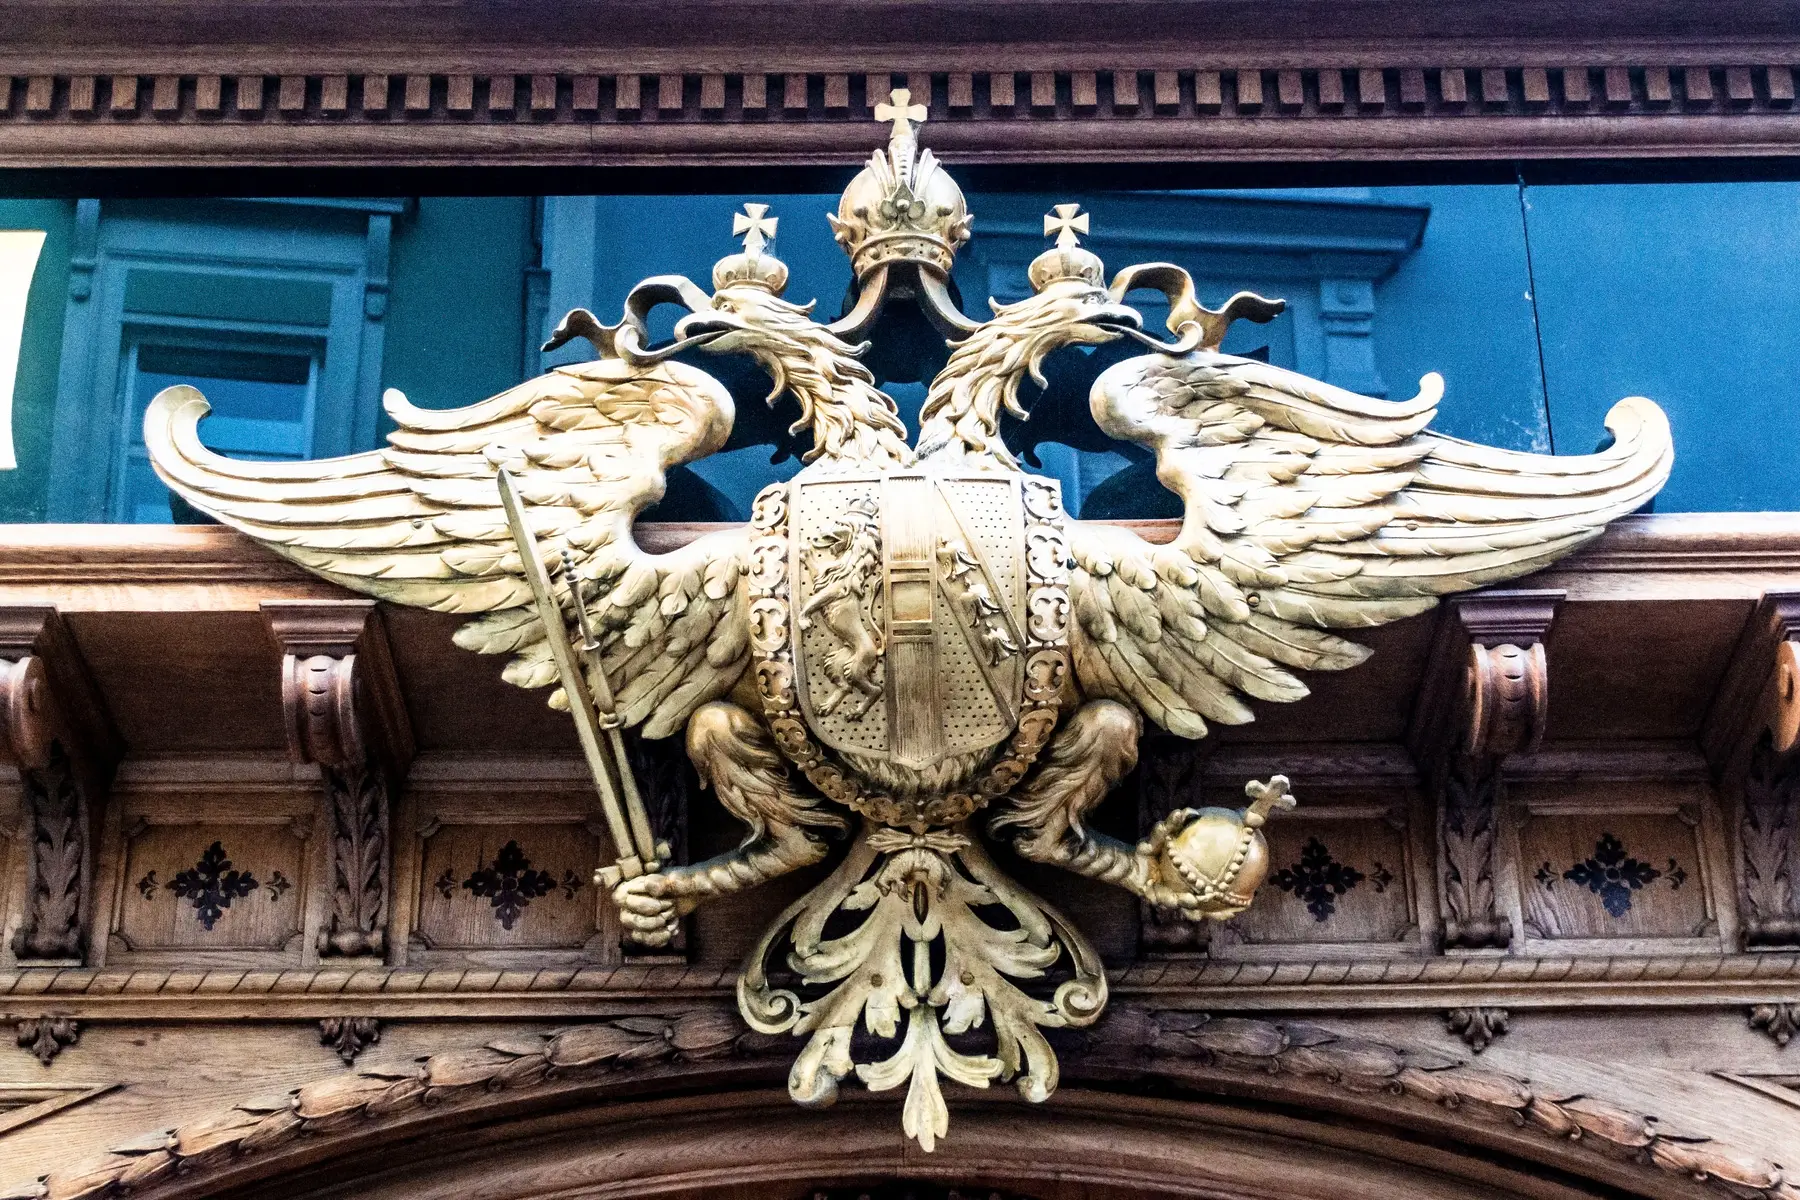 The House of Habsburg coat of arms